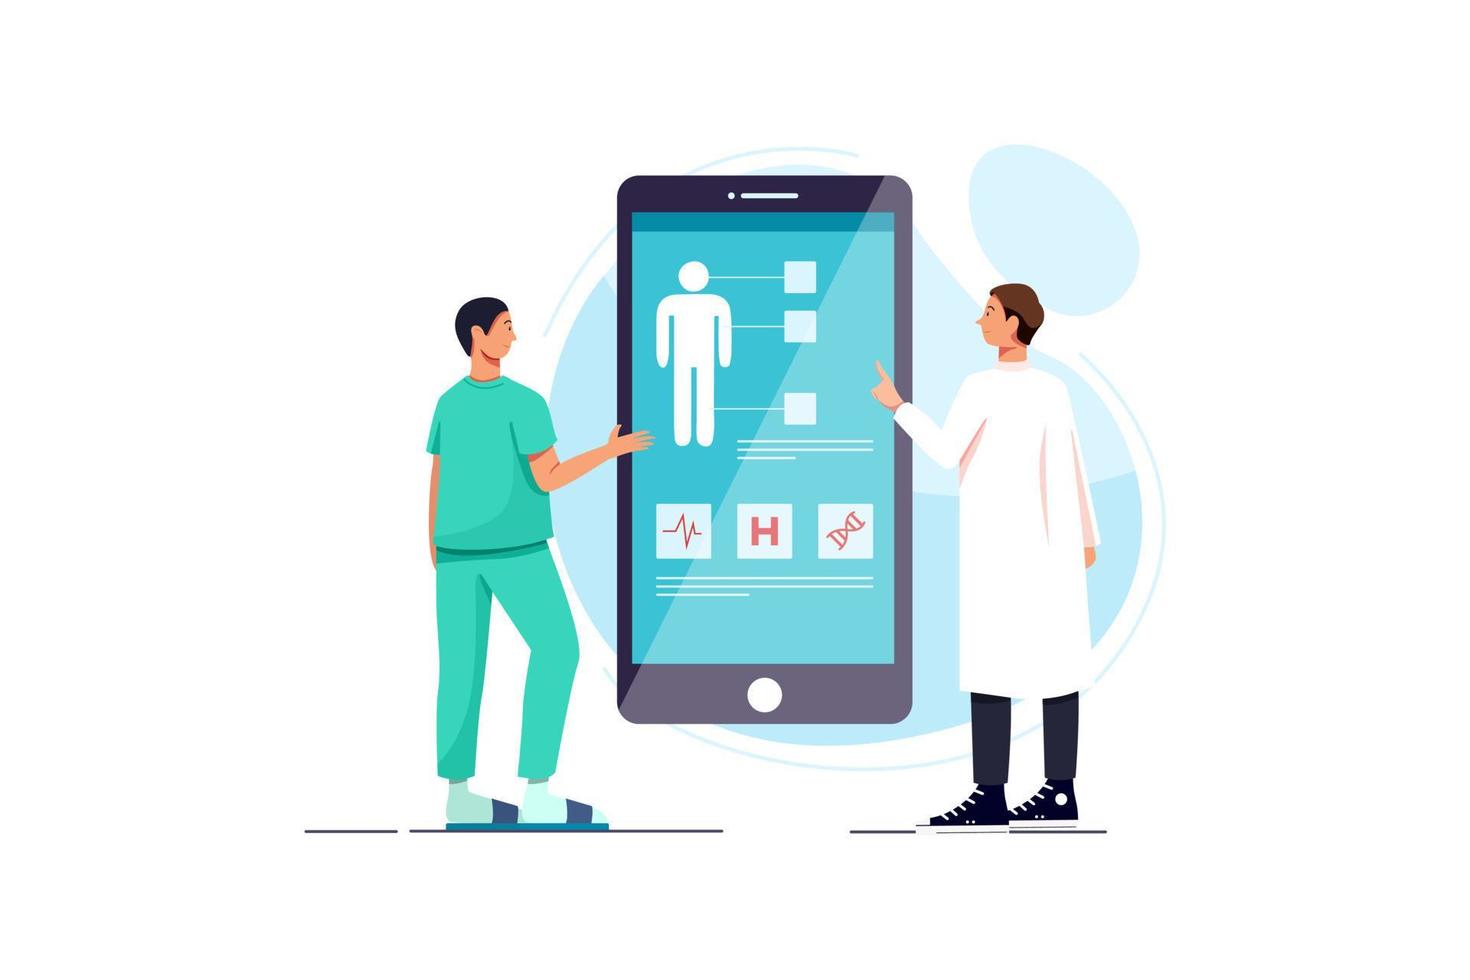 Doctors examining a patient using a medical app on a smartphone, online medical consultation and technology concept vector